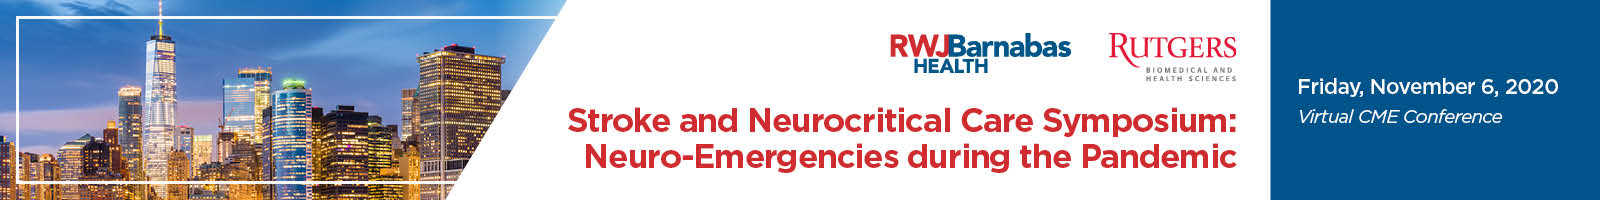 2nd Annual Stroke and Neurocritical Care Symposium:  Advanced Management for Neurological and Neurosurgical Emergencies and Critical Care: Neuro-Emergencies During the Pandemic Banner